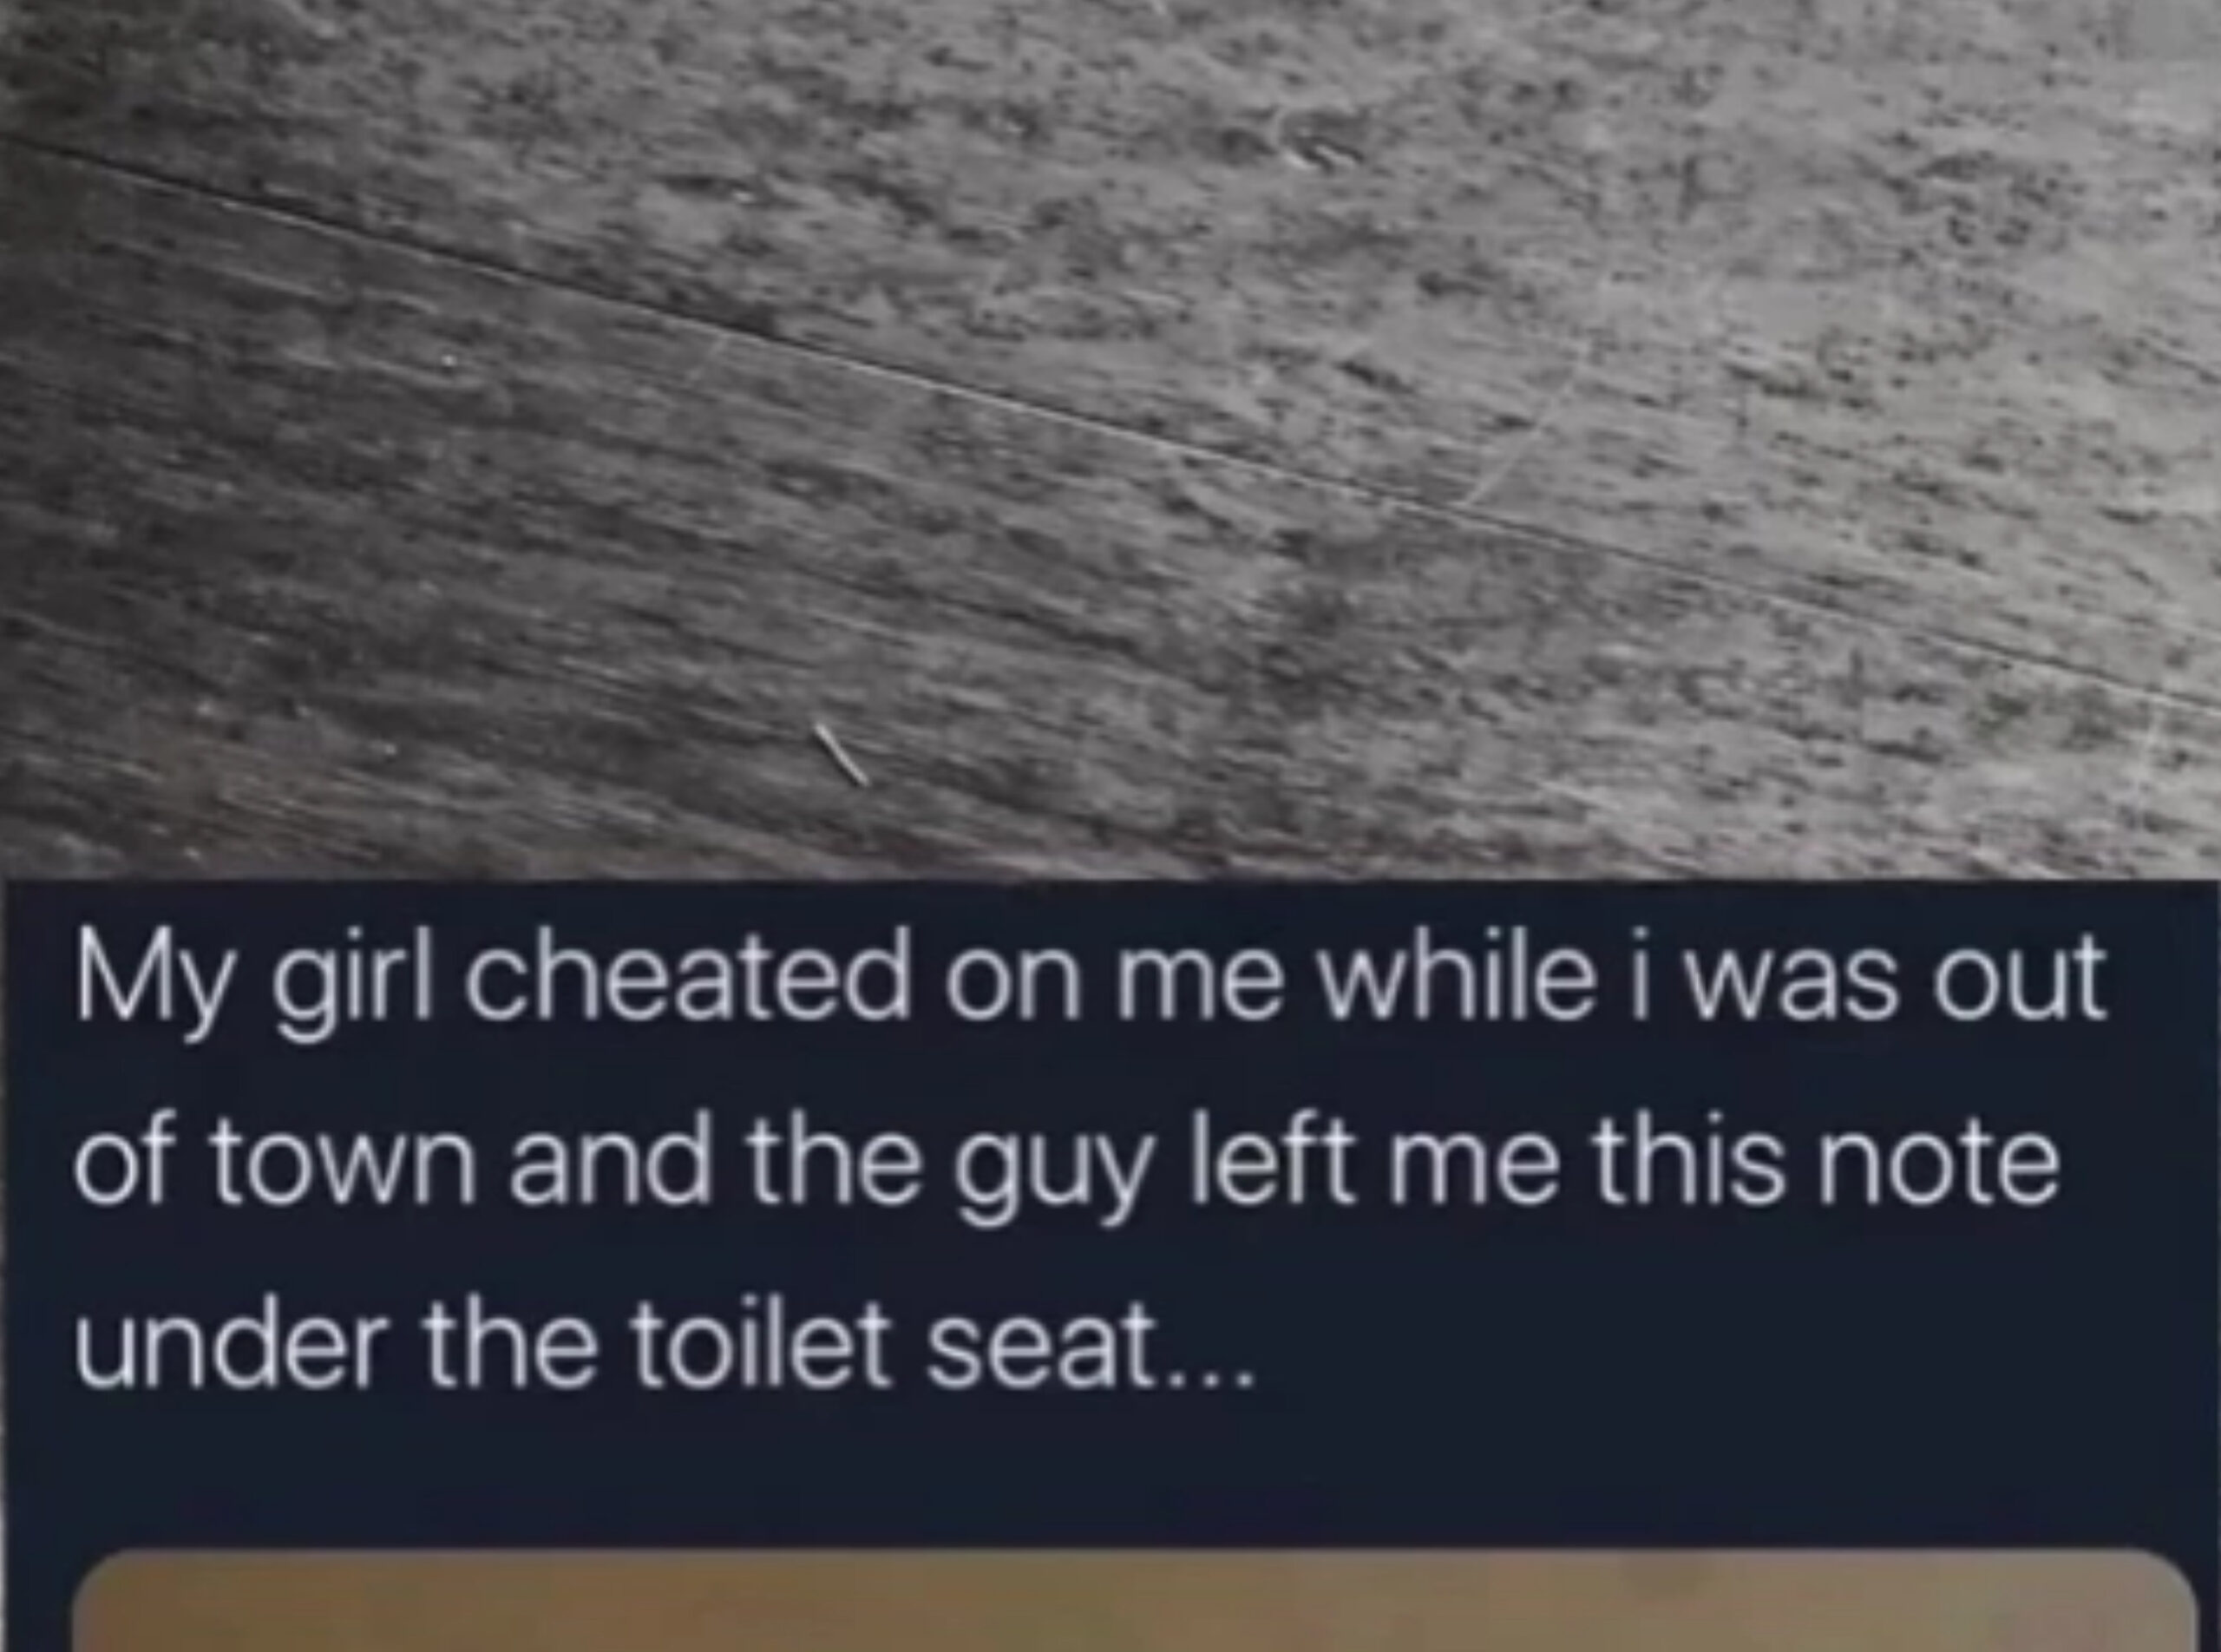 Man in shock after his girlfriends other man leaves a note under his toilet seat revealing she cheated on him while he was out of town